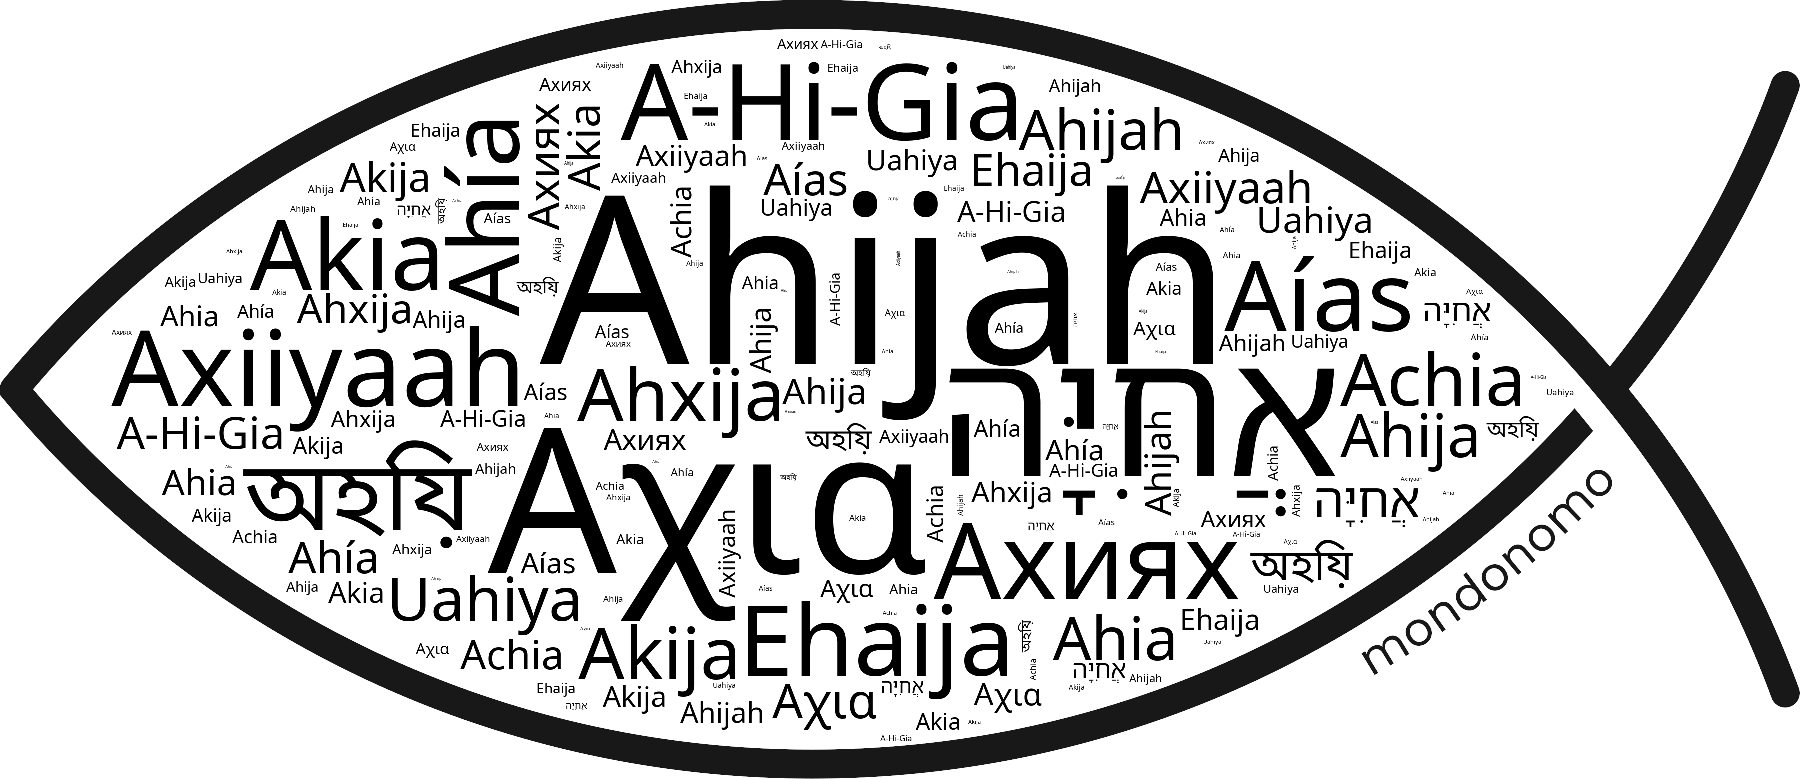 Name Ahijah in the world's Bibles